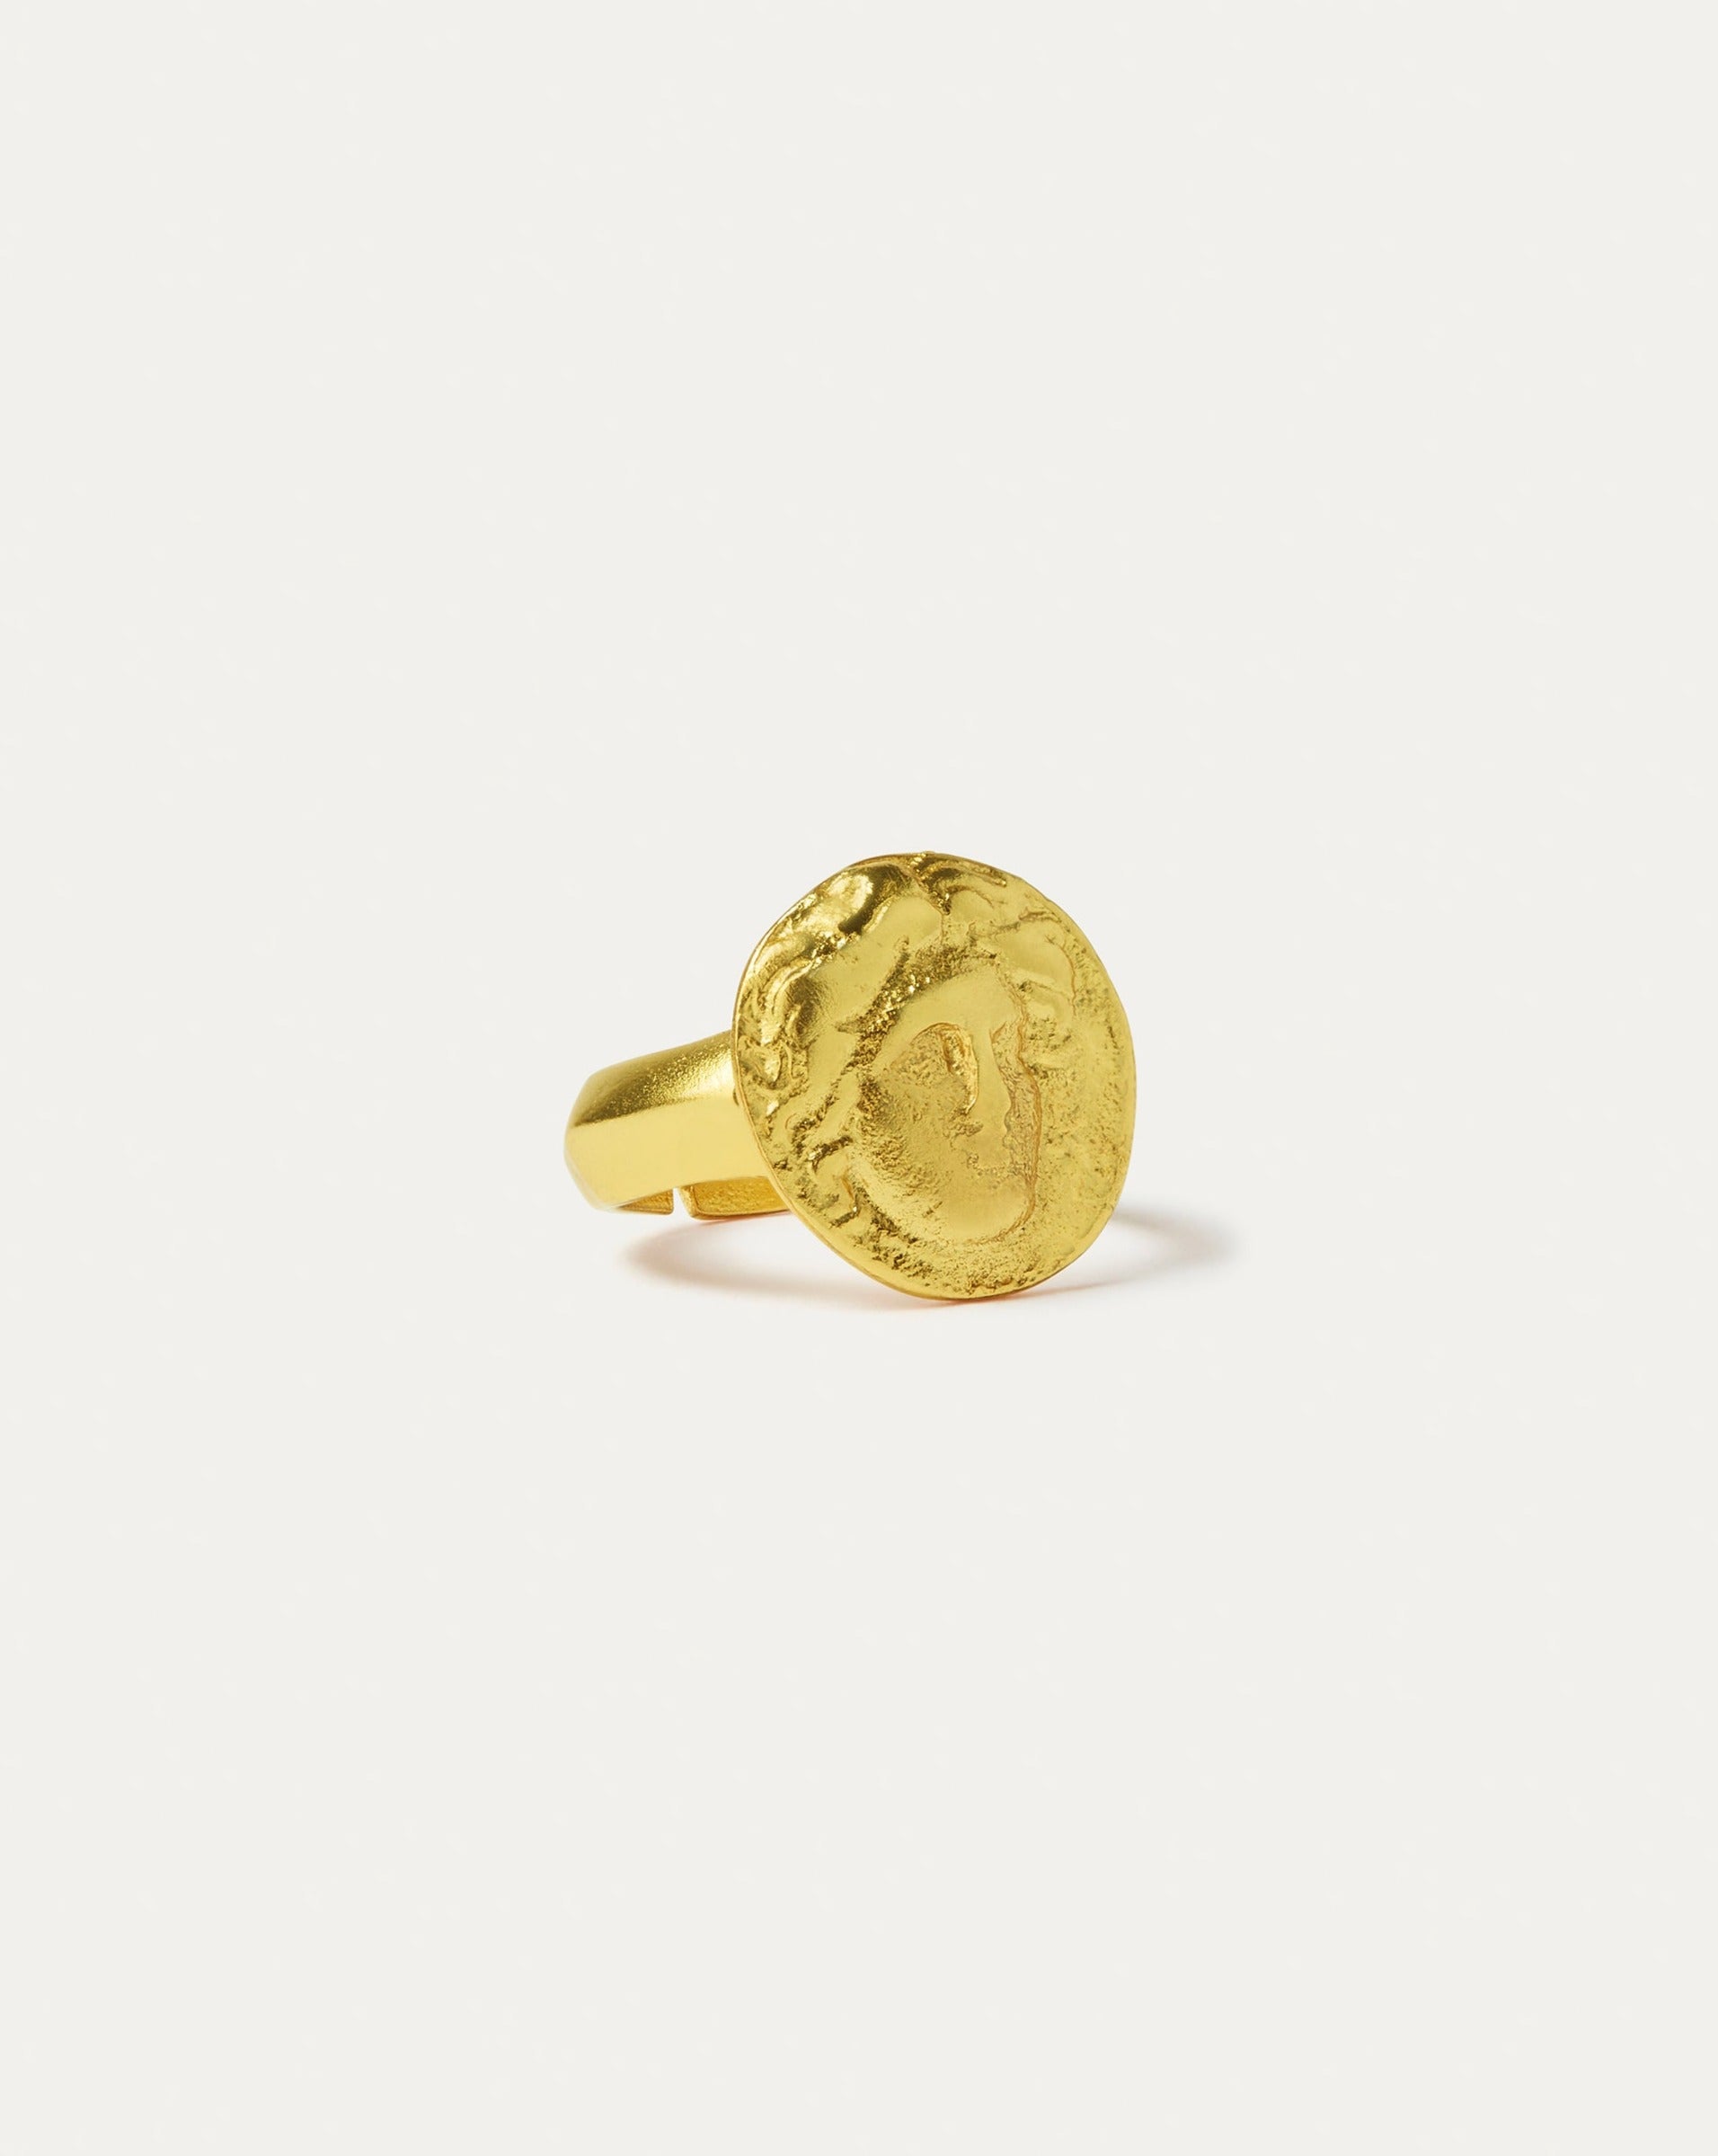 Gorgon Medusa Cocktail Ring | Sustainable Jewellery by Ottoman Hands